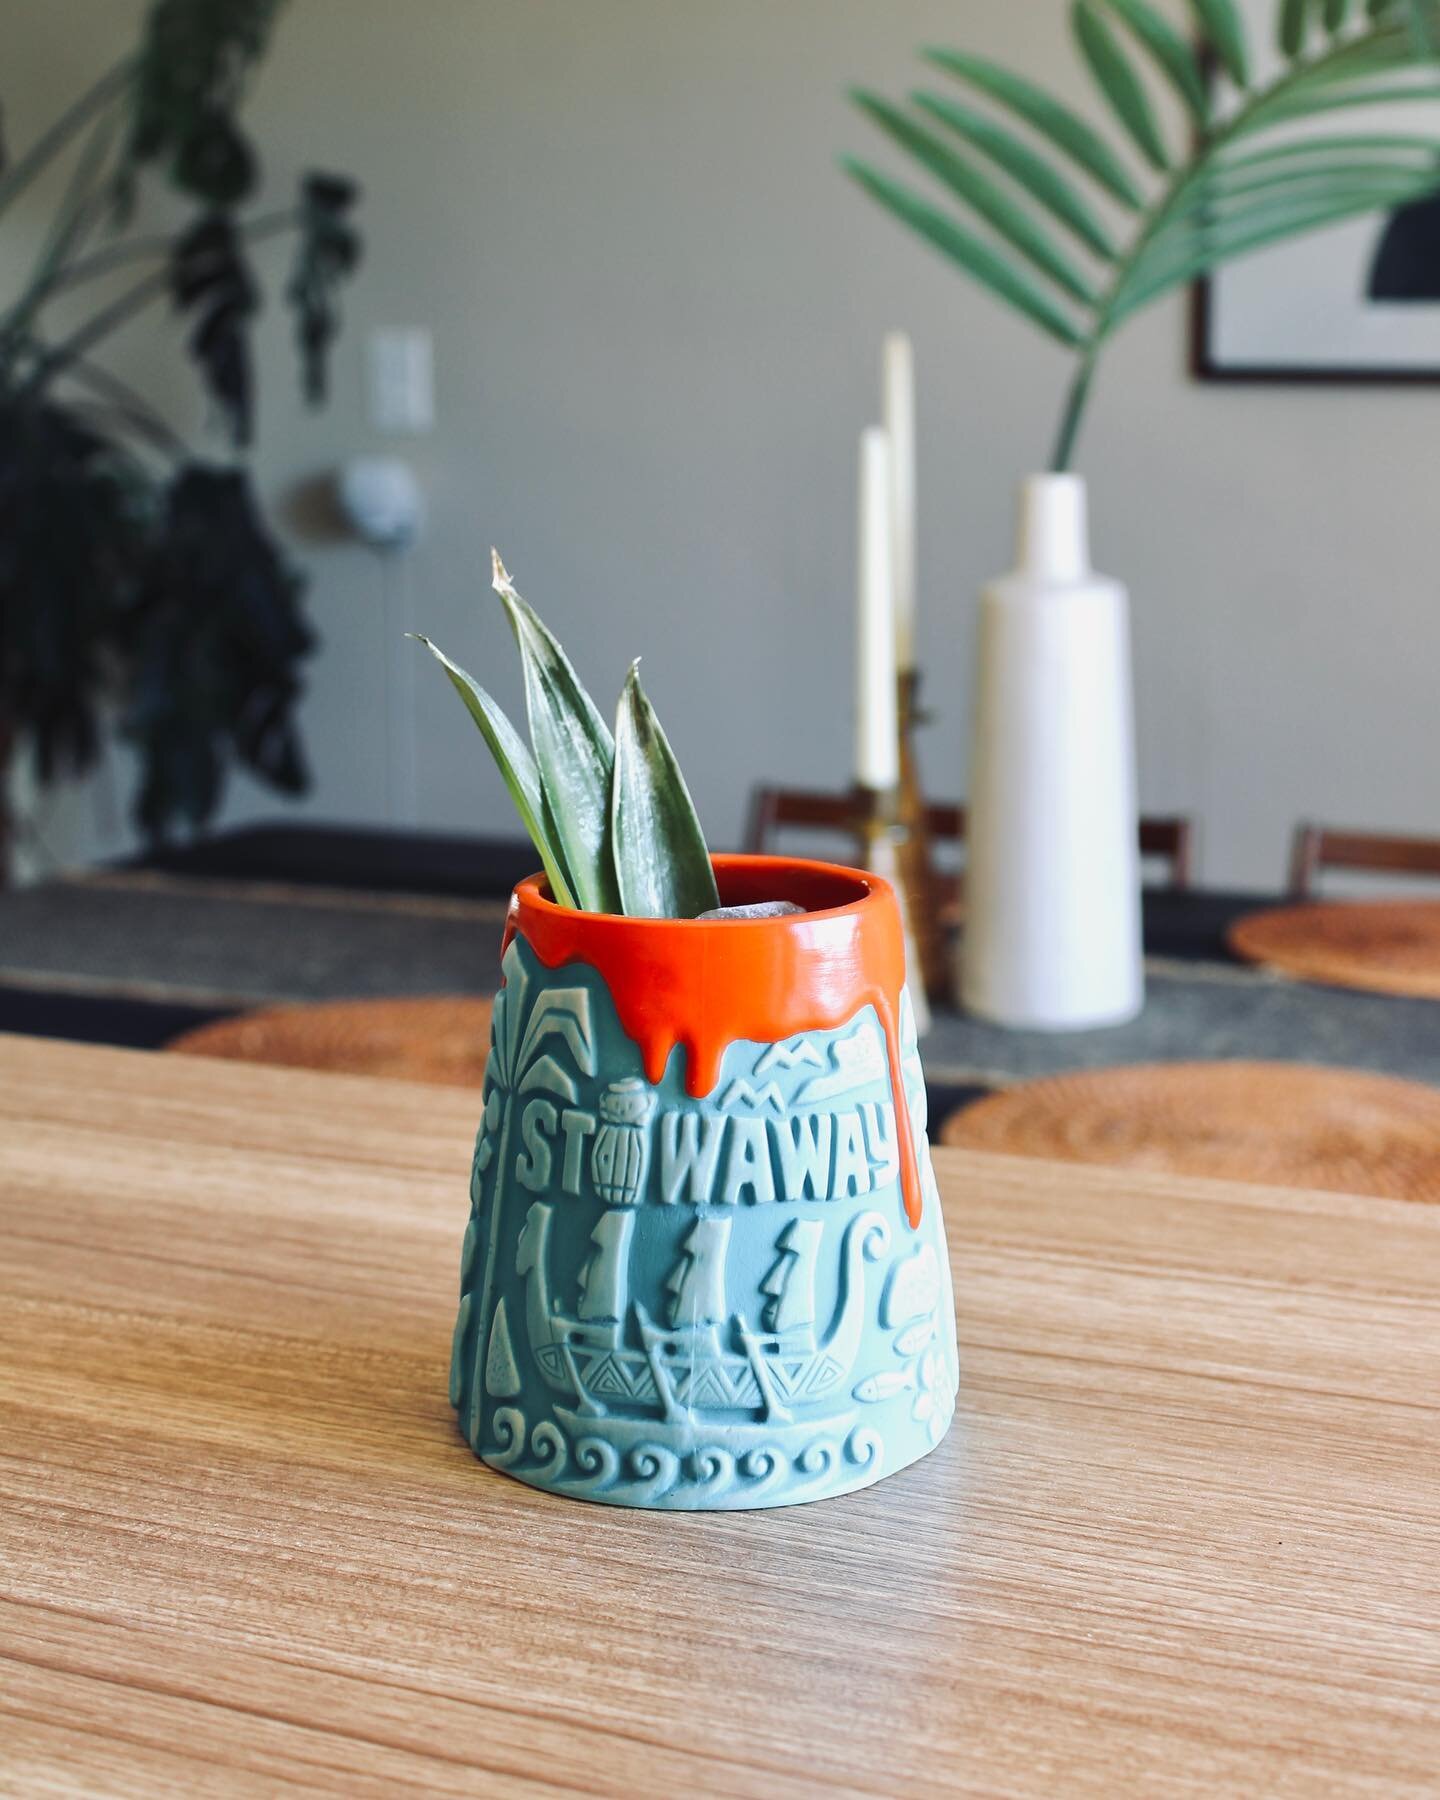 Sharing our newest tiki mug from @stowawaytiki! We love the colors and the overflow effect on the rim! Also, we appreciate a smooth matte finish for tiki mugs! 🌋🗿🌿 #MugMonday